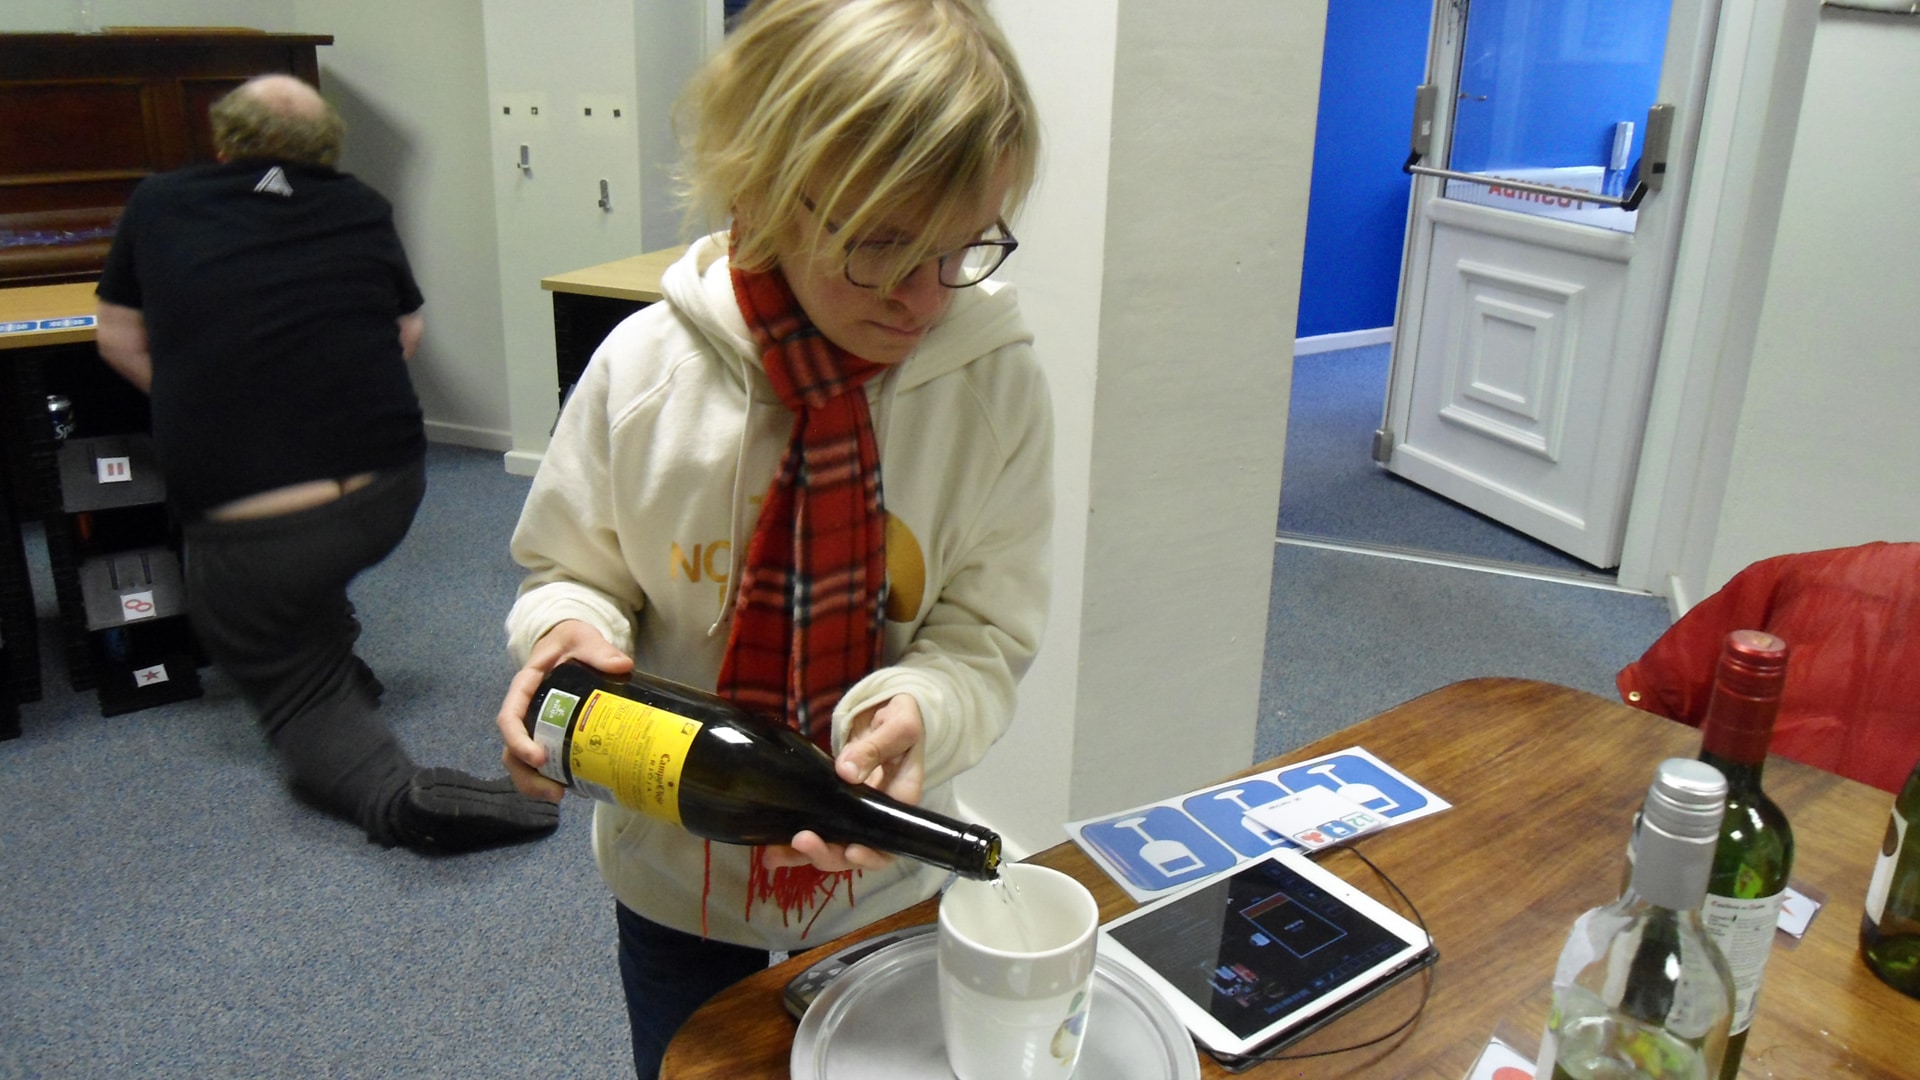 Magpies member holding a mug on a set of scales with bottles of wine, learning about drinks measurements